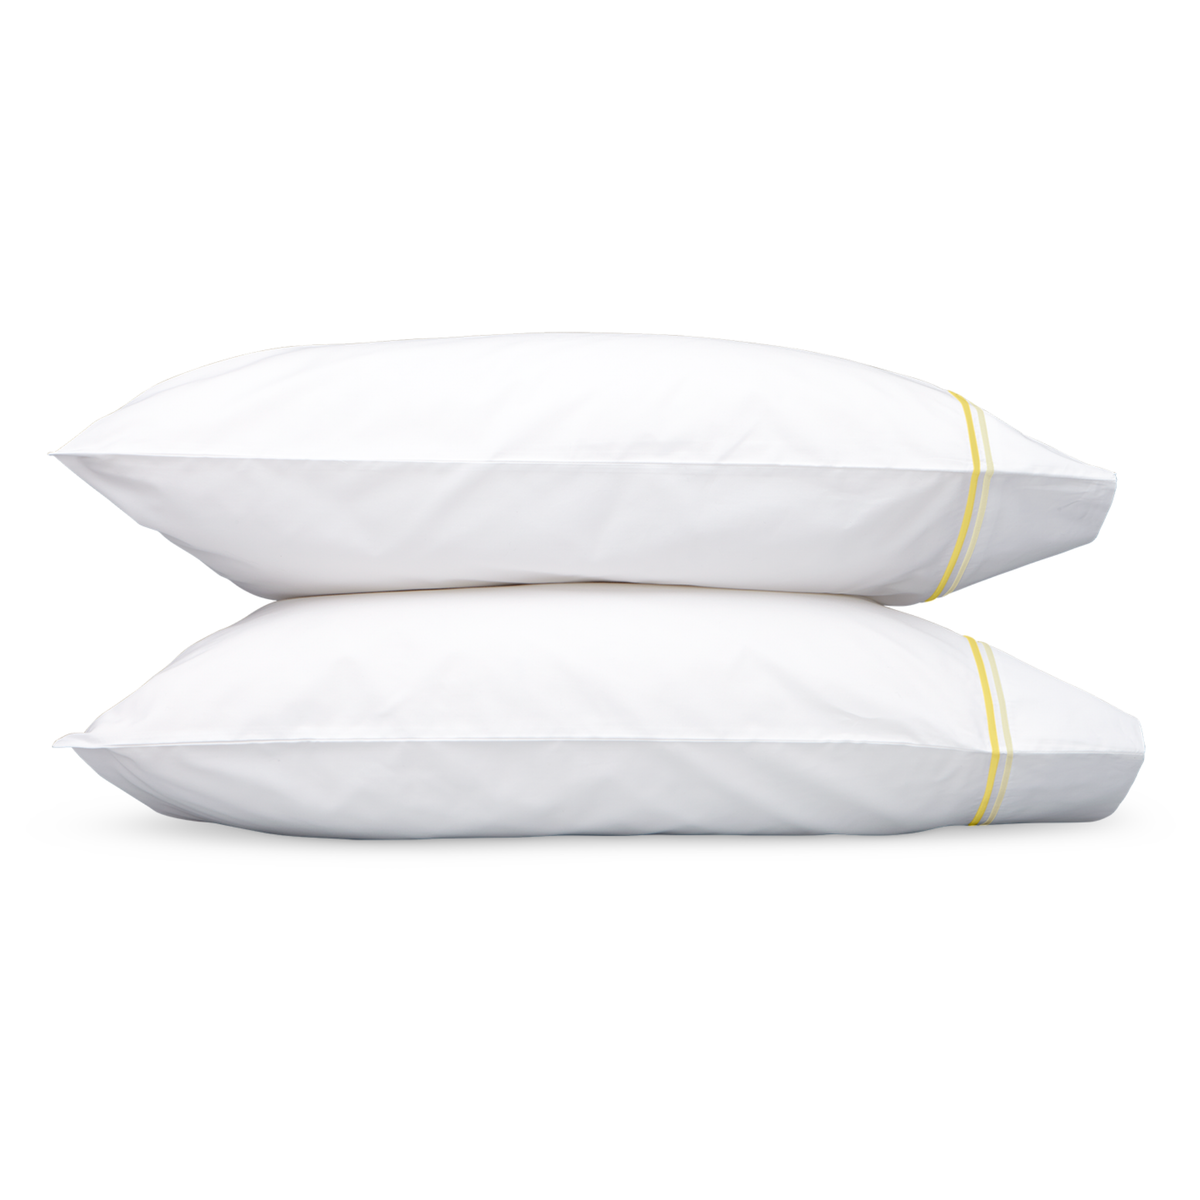 Pair of Pillowcases in Lemon Color Matouk Essex Bedding Collection